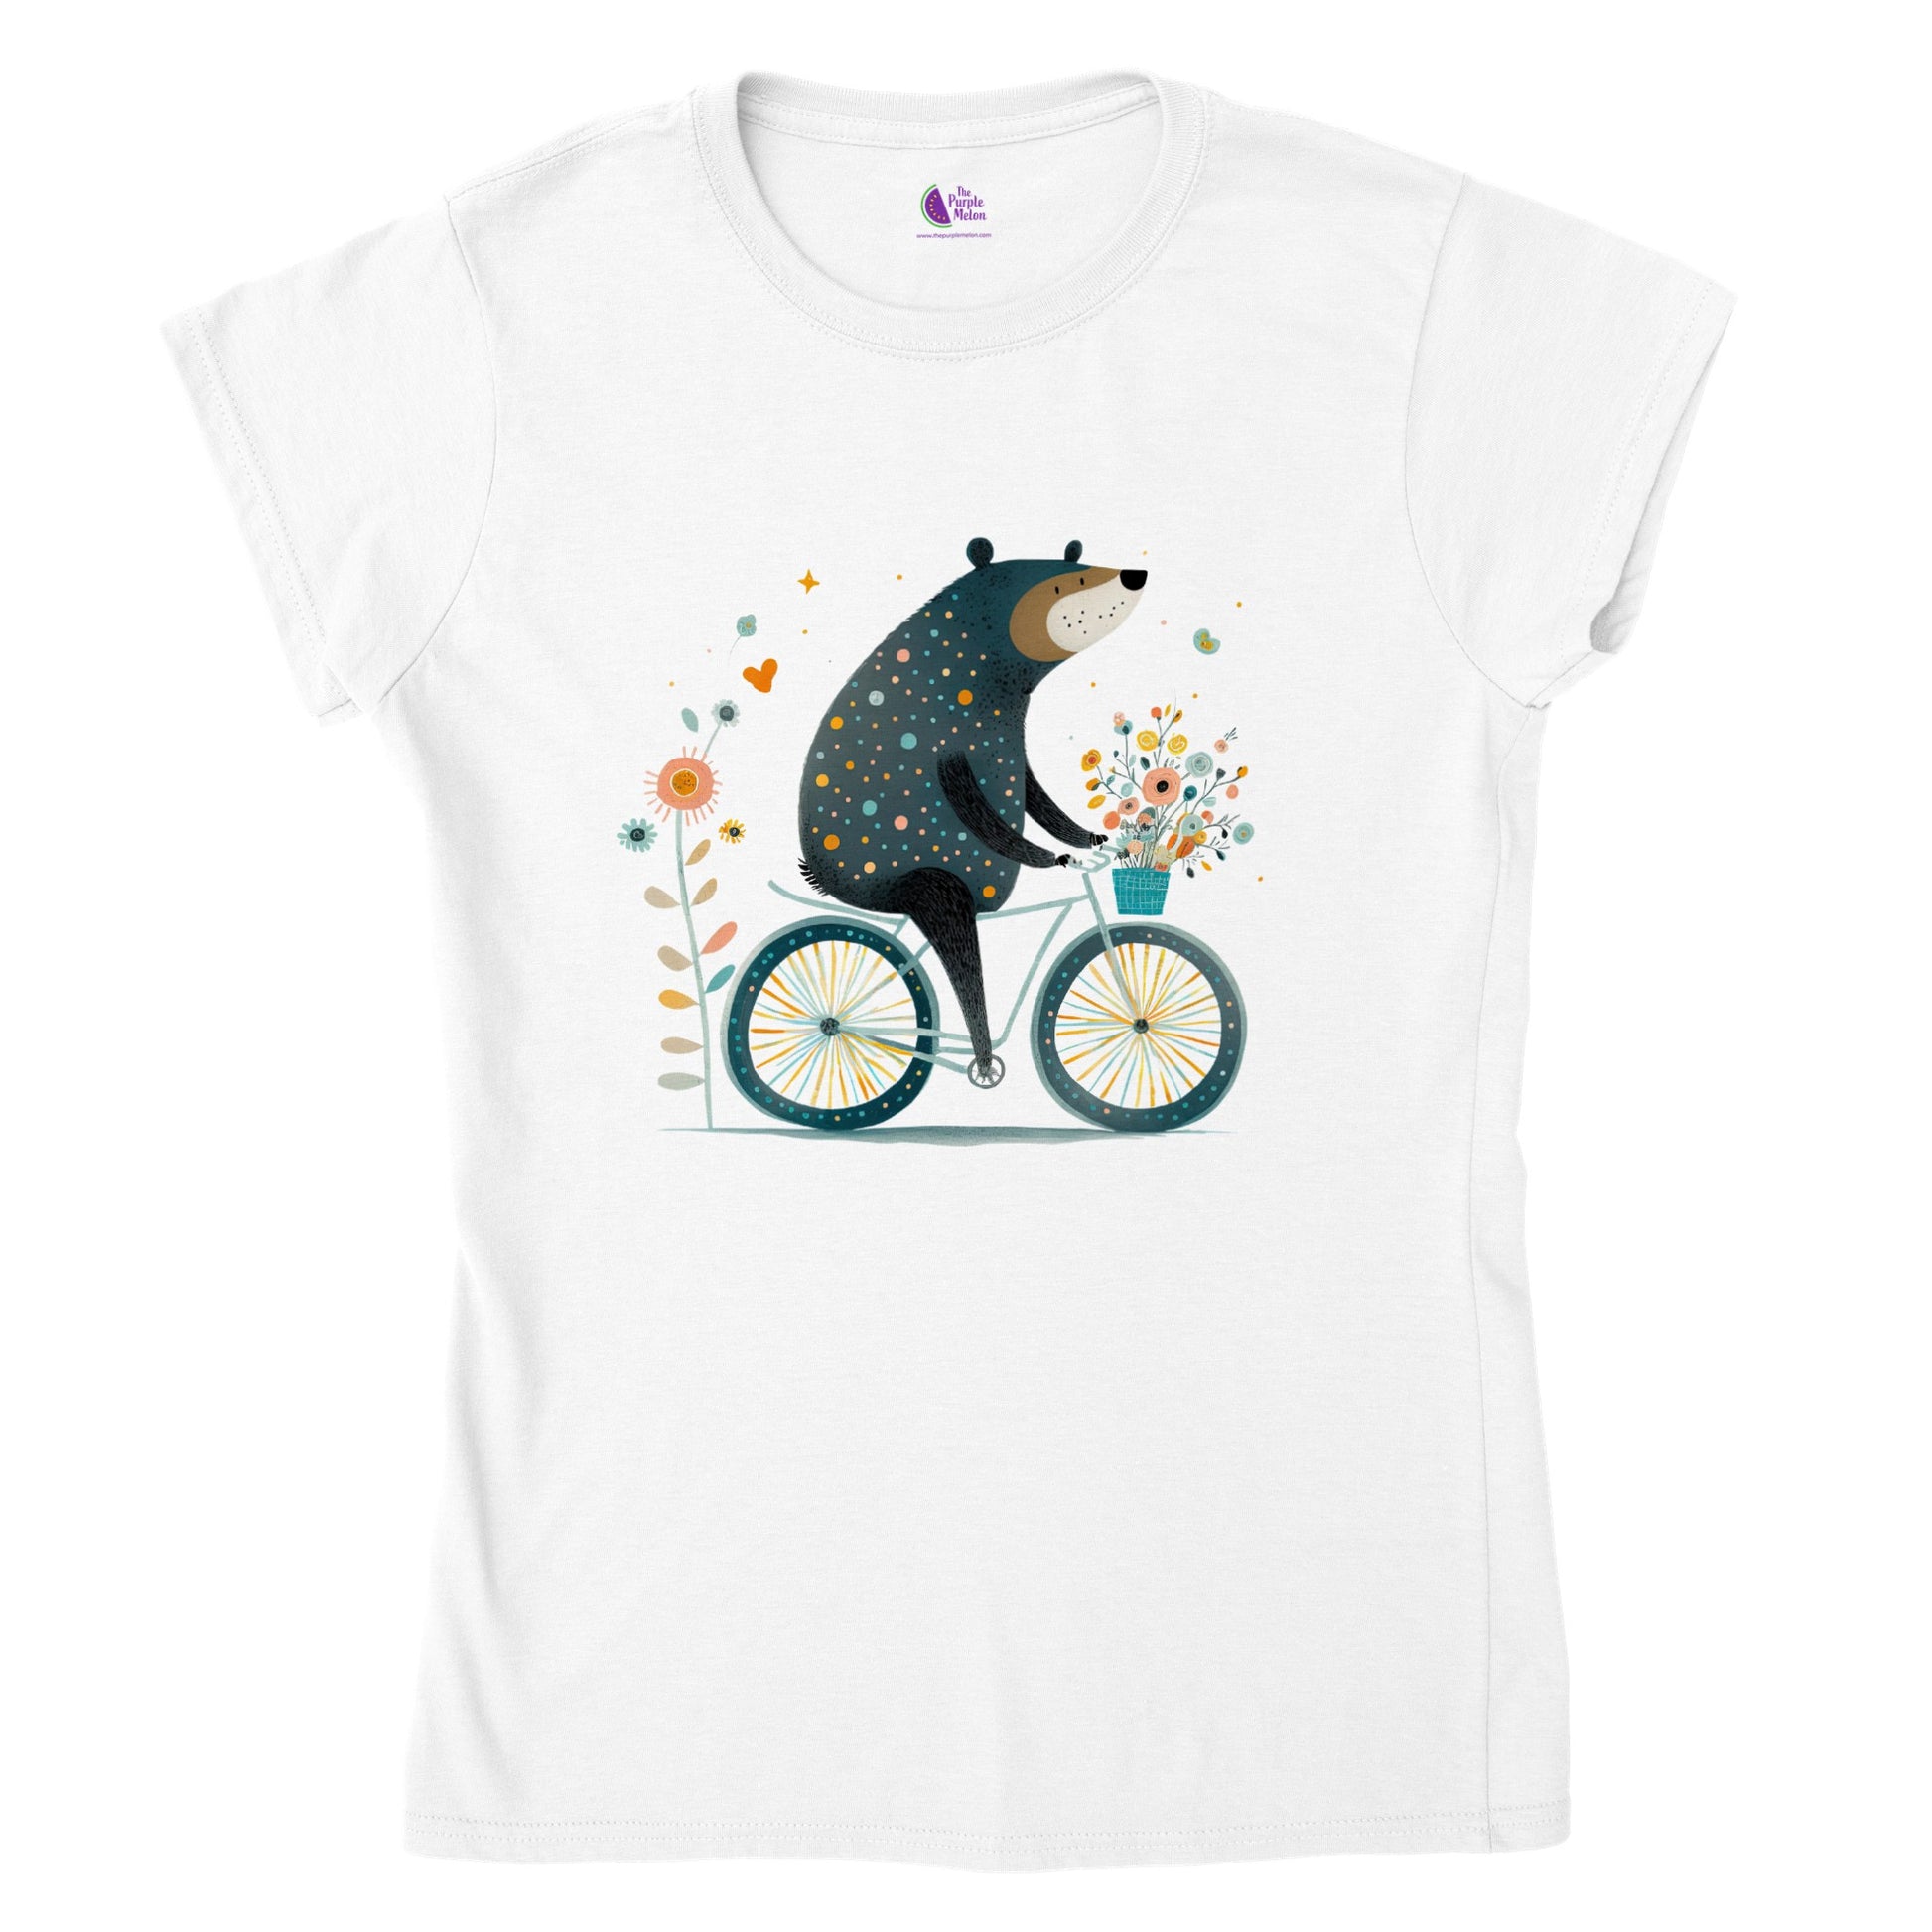 A white t-shirt with a cute bear riding a bicycle with a basket of flowers print